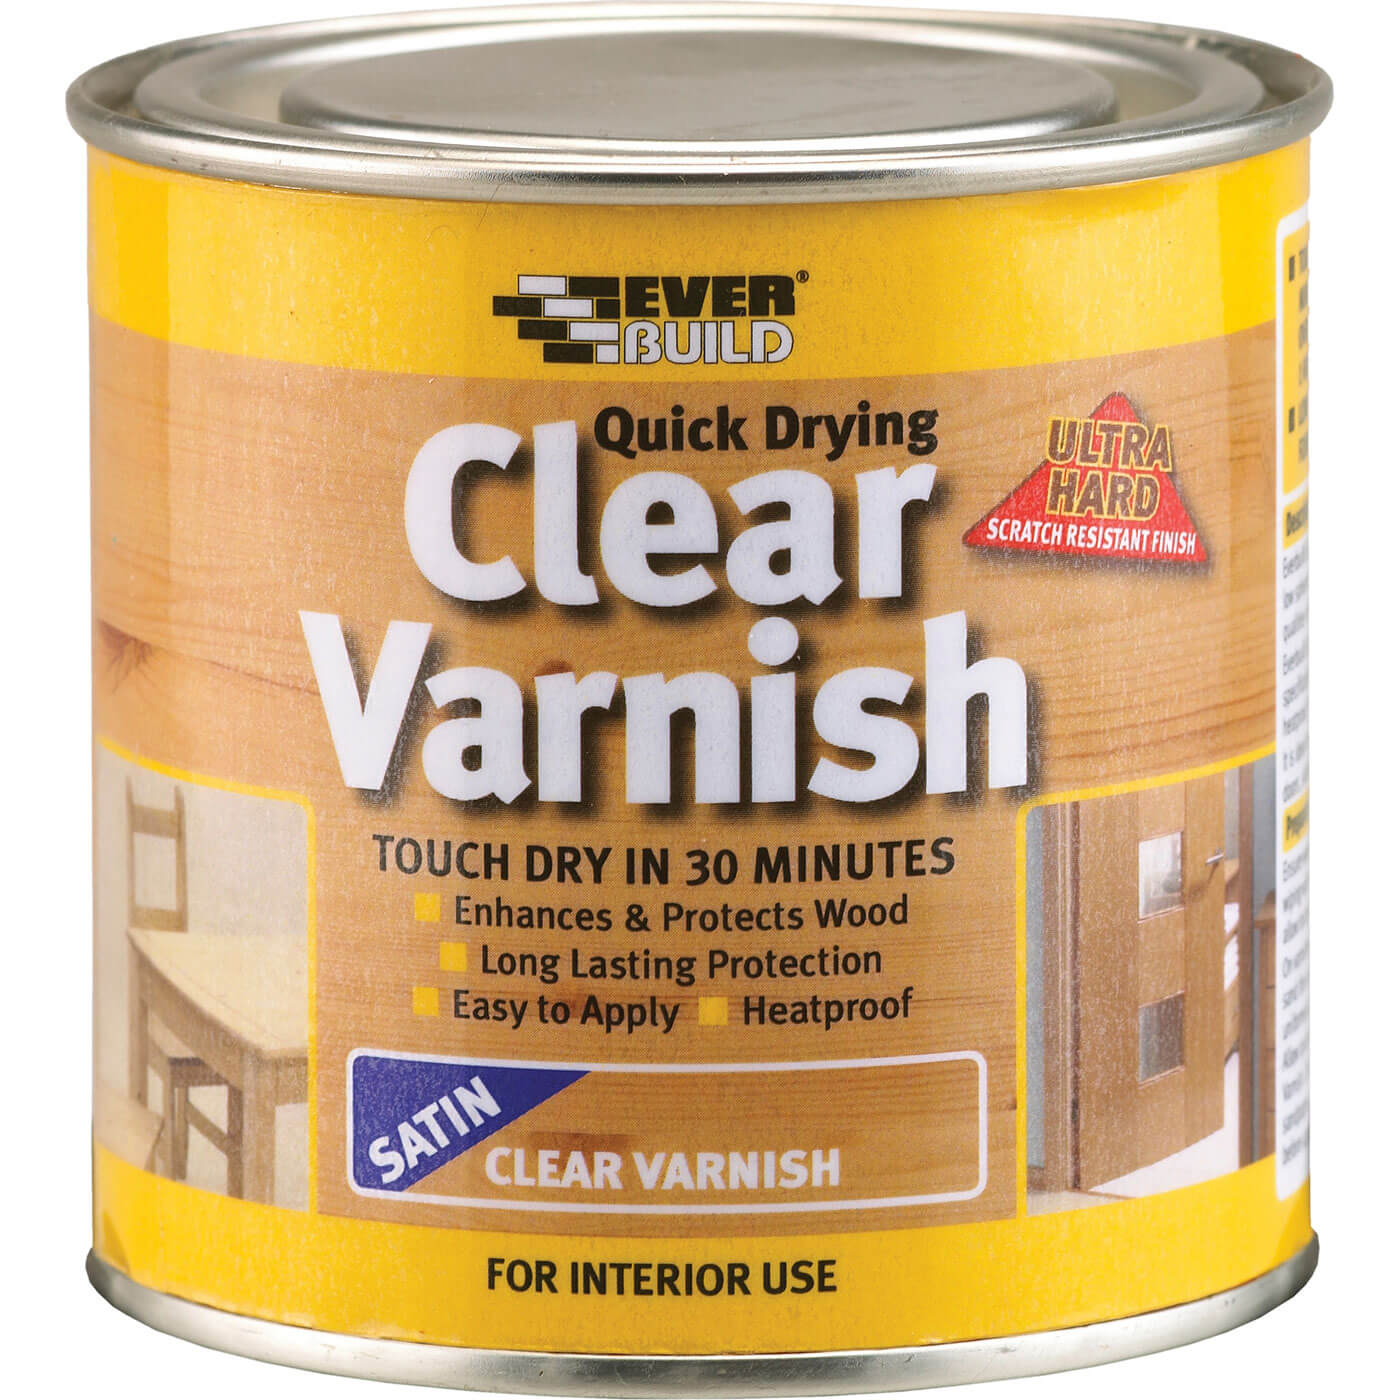 Image of Everbuild Quick Drying Wood Varnish Clear Satin 250ml